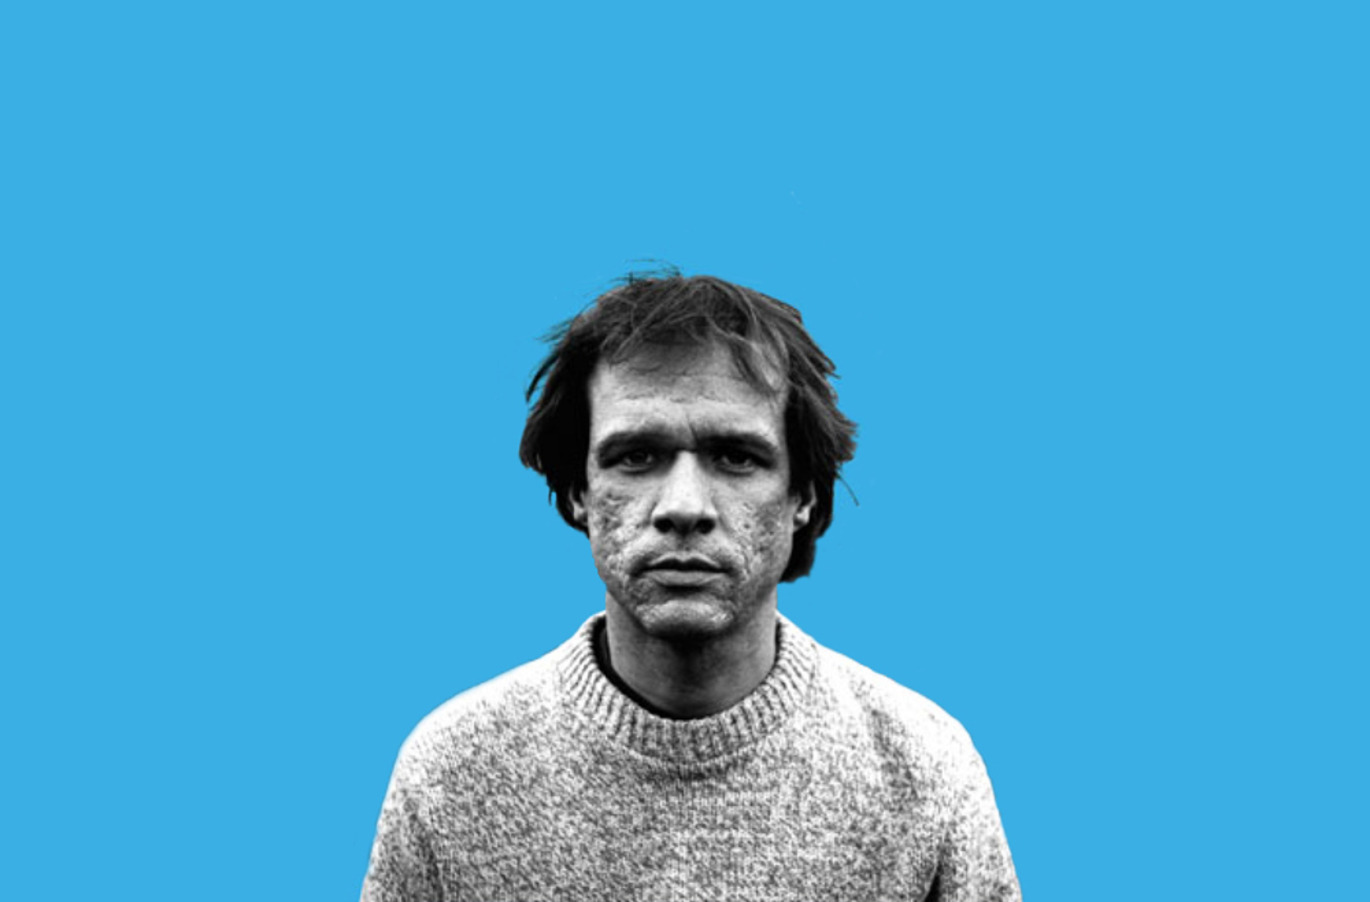 Tonight: Squeaky Wheel Presents Wild Combination: A Portrait of Arthur Russell